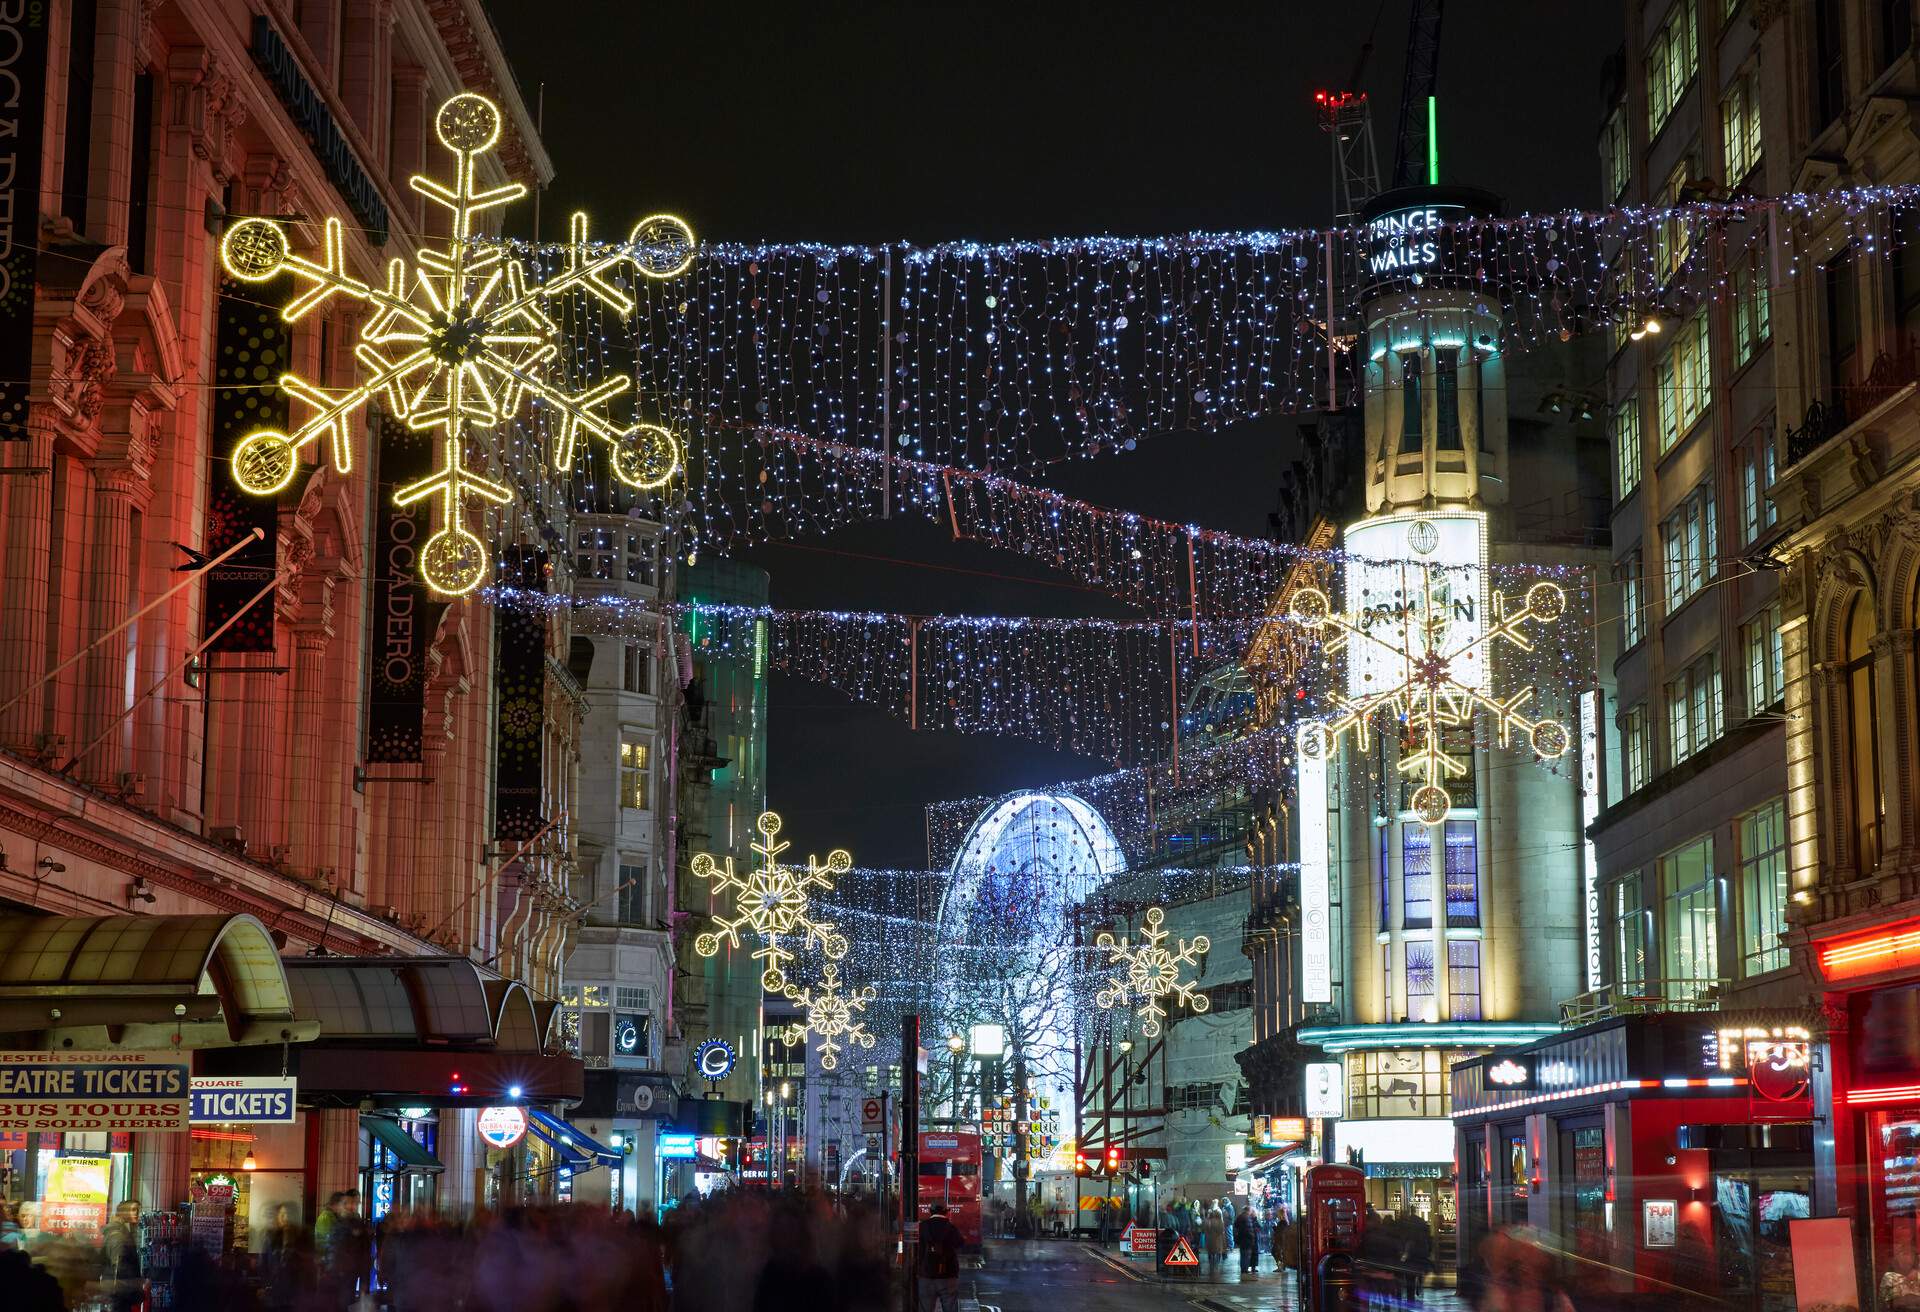 Christmas lights along Coventry street looking toward Leicester Square illuminated at night